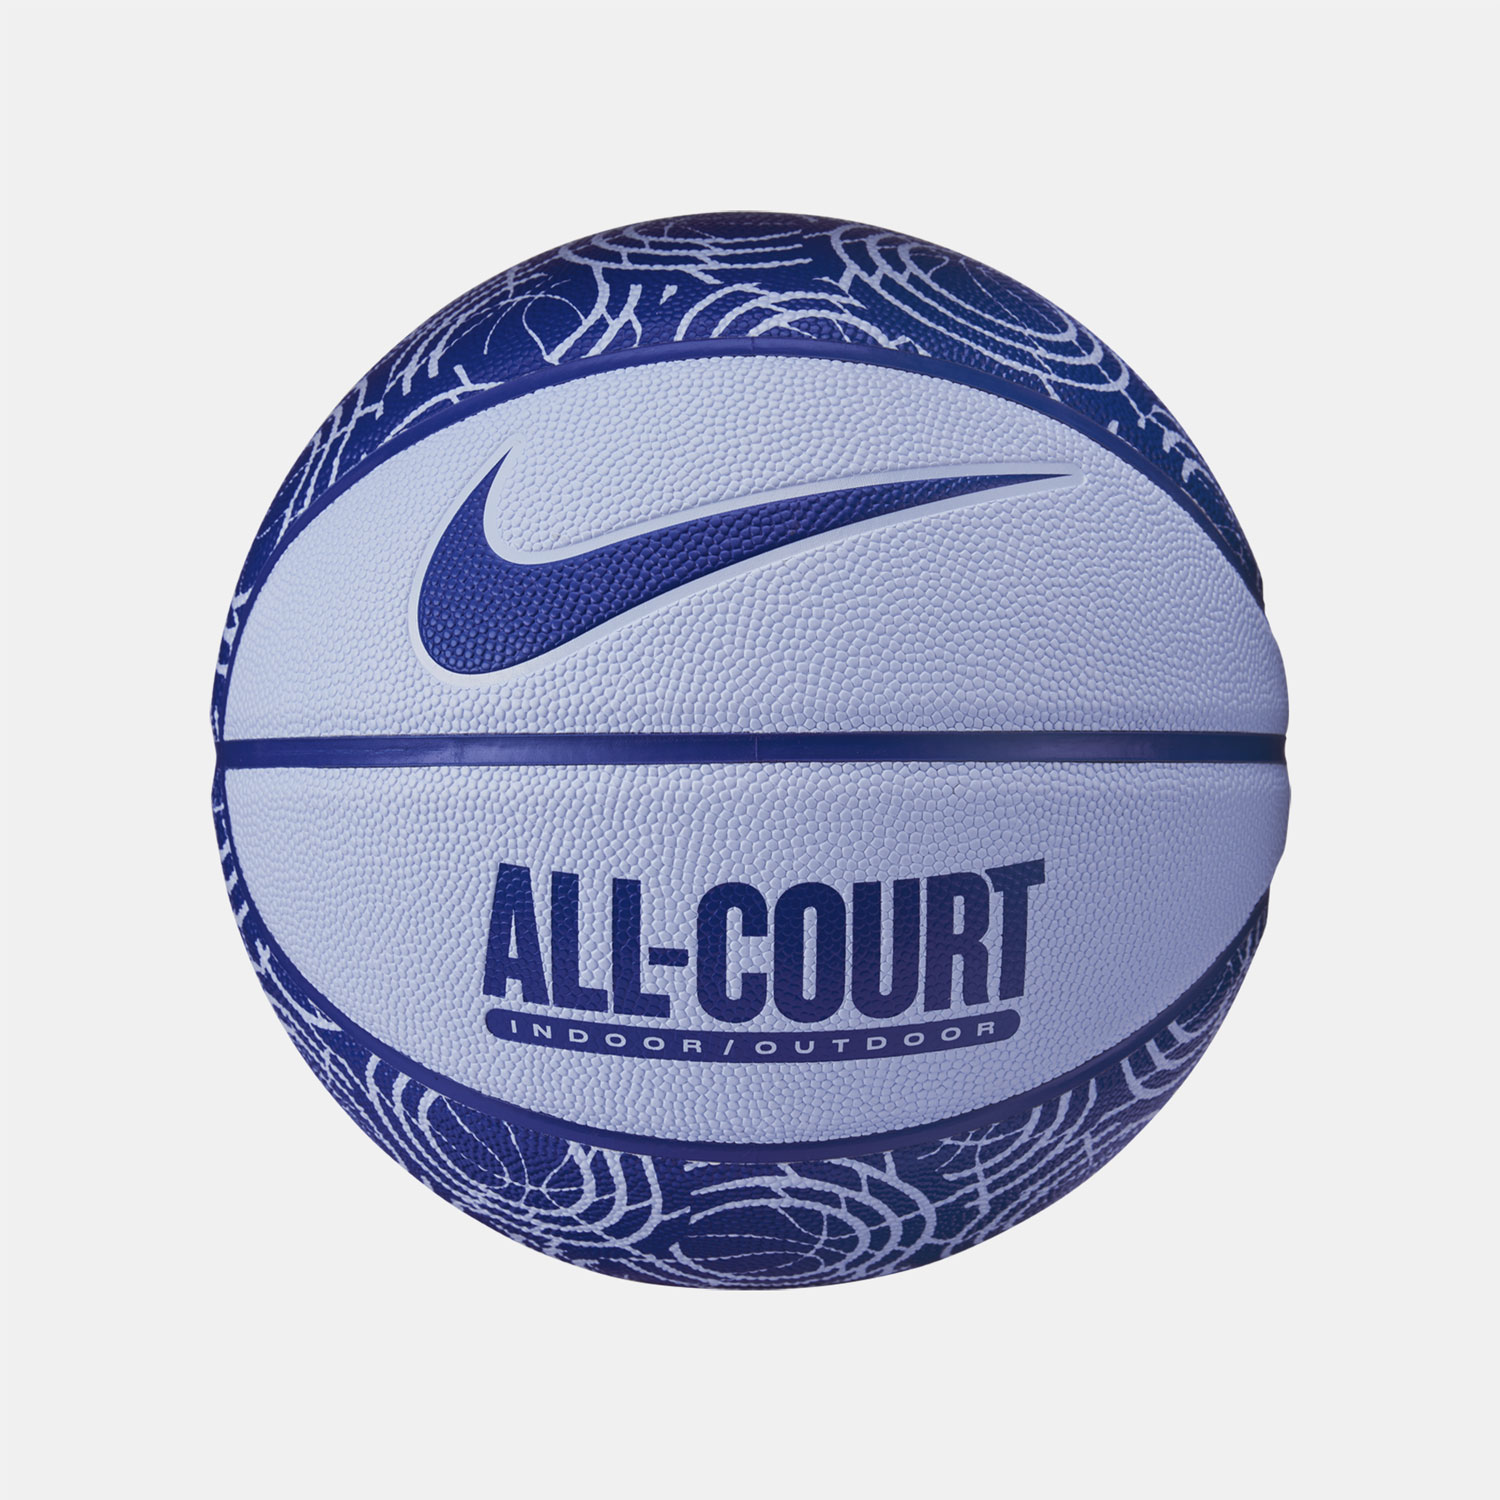 NIKE EVERYDAY ALL COURT 8P GRAPHIC BASKET BALL ΜΠΛΕ